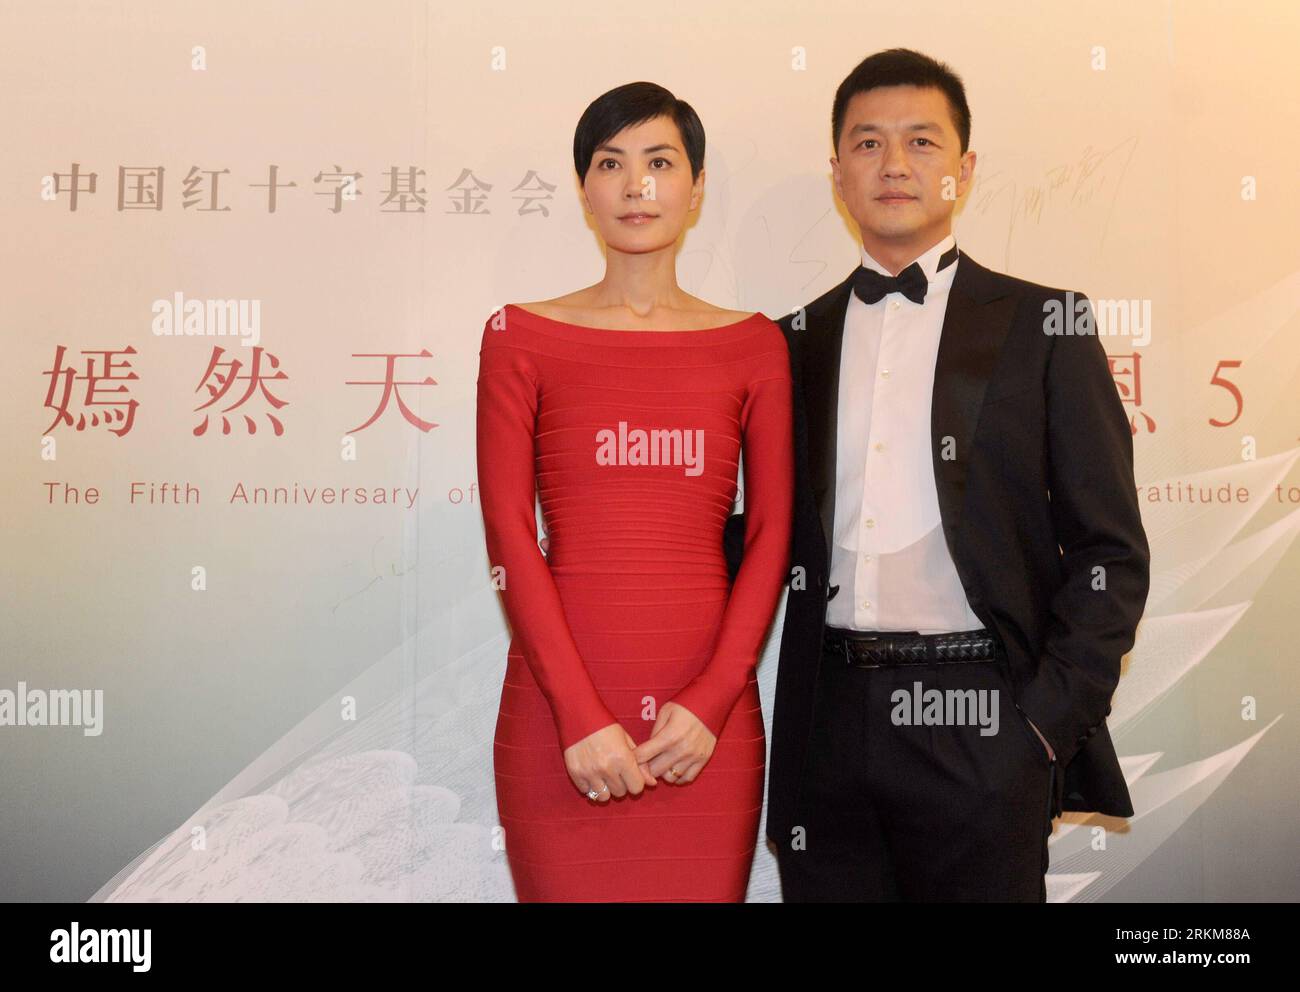 Bildnummer: 56541383  Datum: 01.12.2011  Copyright: imago/Xinhua (111201) -- BEIJING, Dec. 1, 2011 (Xinhua) -- Singer Faye Wong (L) and her husband Li Yapeng, co-founders of the Smile Angel Foundation, pose for photo during a reception to celebrate the fifth anniversary of the foundation s establishment in Beijing, capital of China, Dec. 1, 2011. A reception and a charity concert were held here Thursday to celebrate to fifth anniversary of the founding of the Smile Angel Foundation. (Xinhua/Luo Xiaoguang) (ljh) CHINA-BEIJING-FAYE WONG-CHARITY CONCERT (CN) PUBLICATIONxNOTxINxCHN People Kultur M Stock Photo